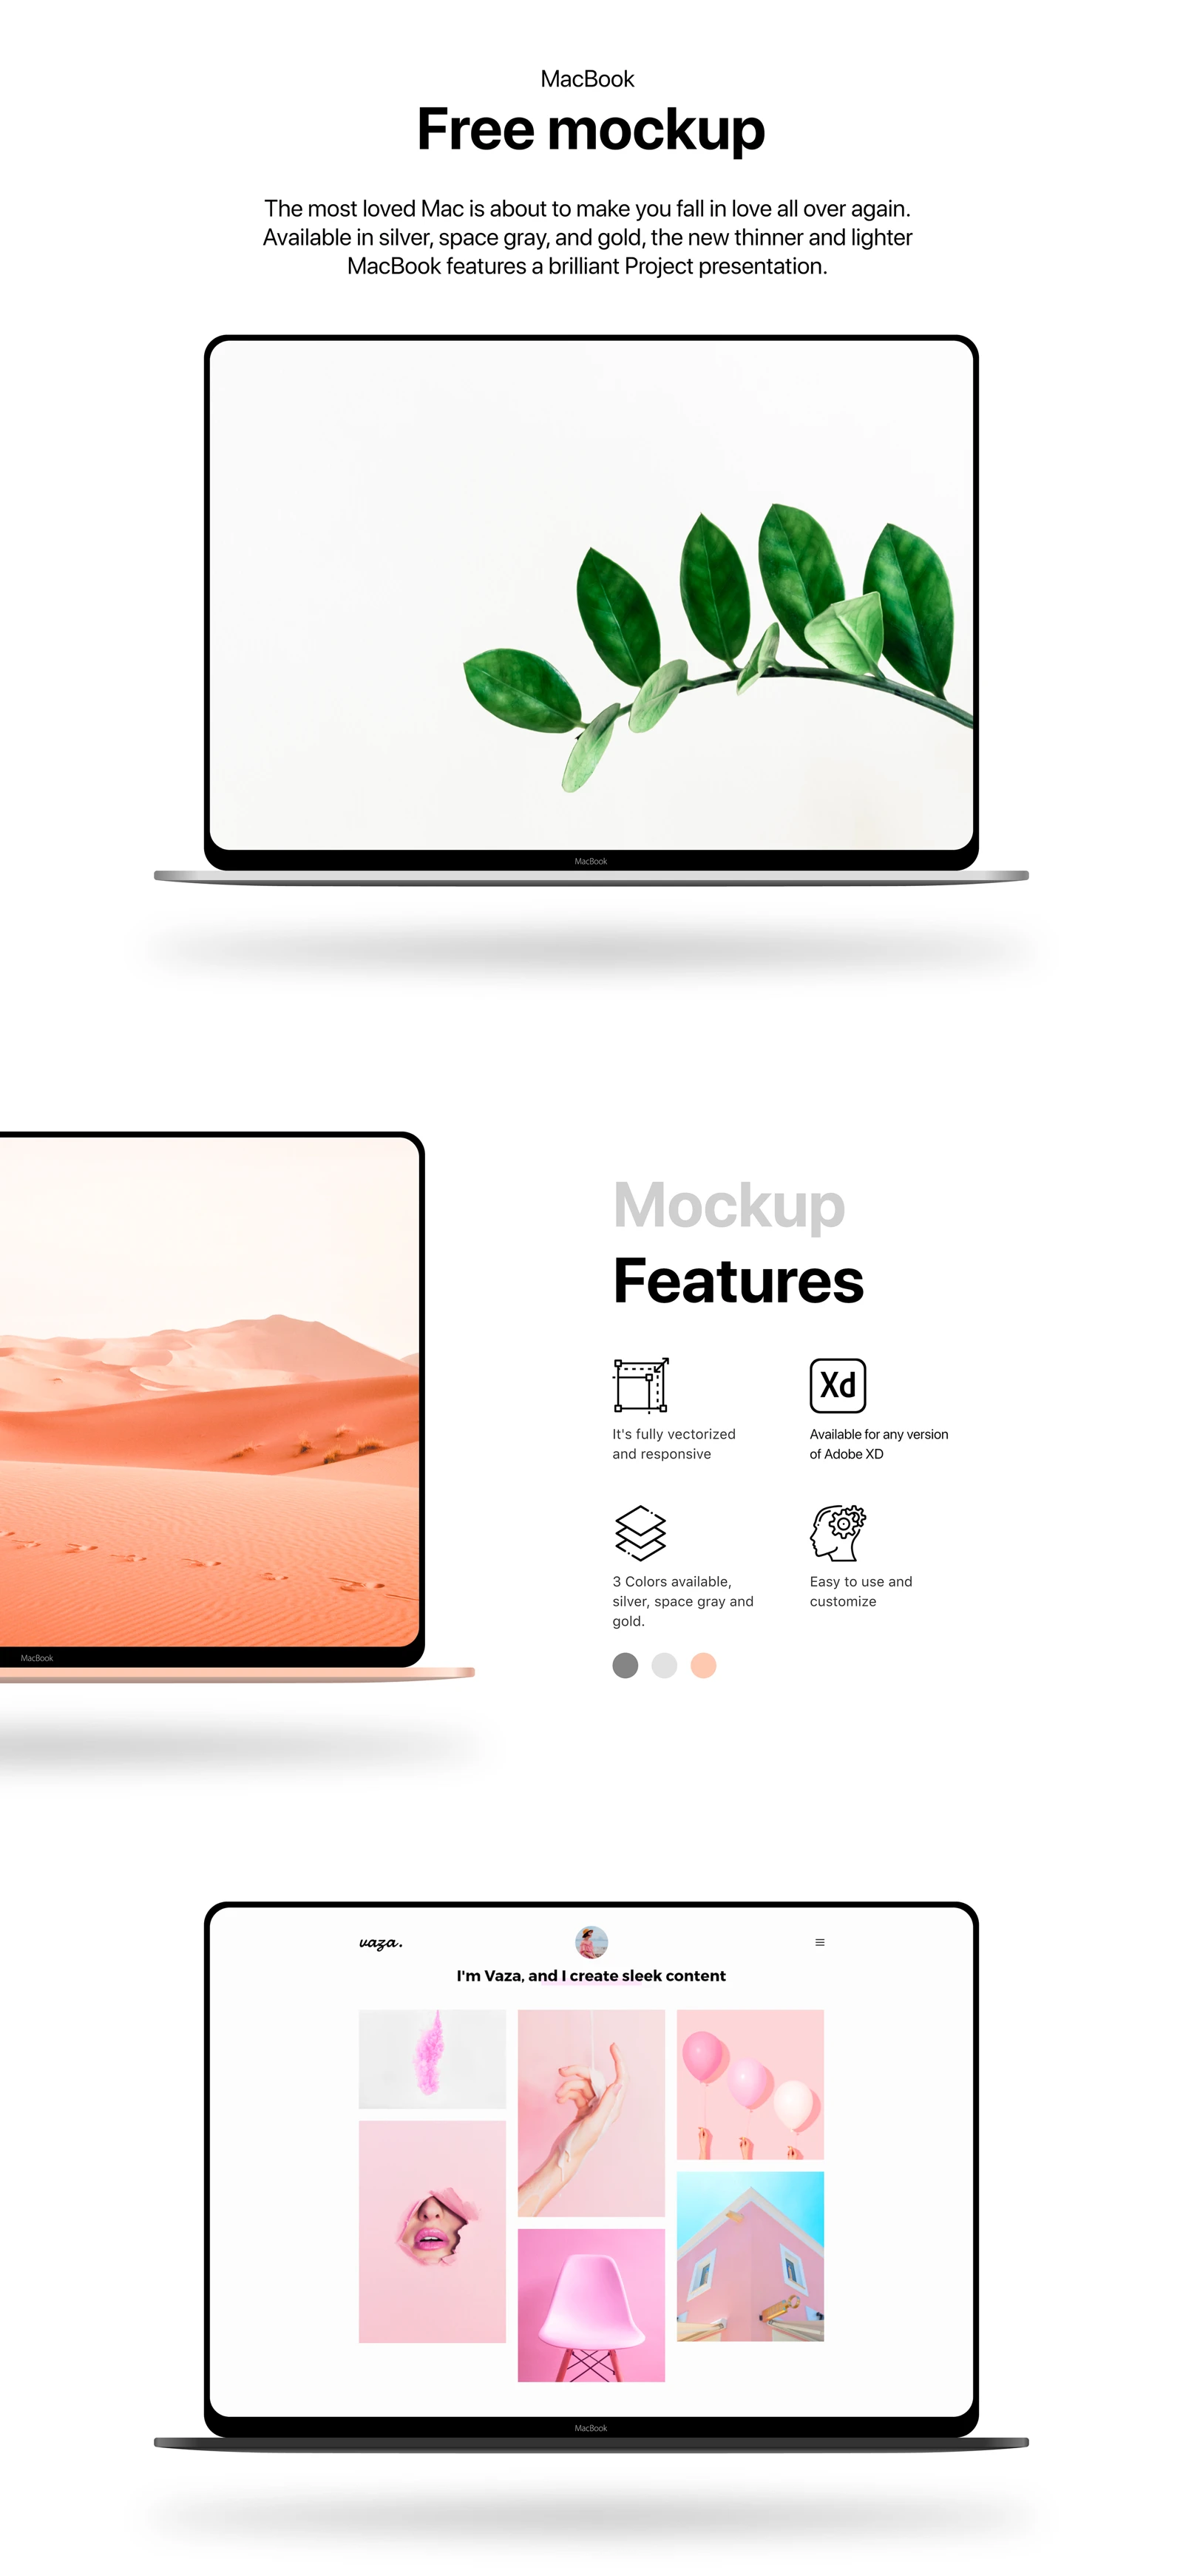 Macbook - Minimal Free Mockup - The most loved Mac is about to make you fall in love all over again. Available in silver, space gray, and gold, the new thinner and lighter MacBook features a brilliant Project presentation.